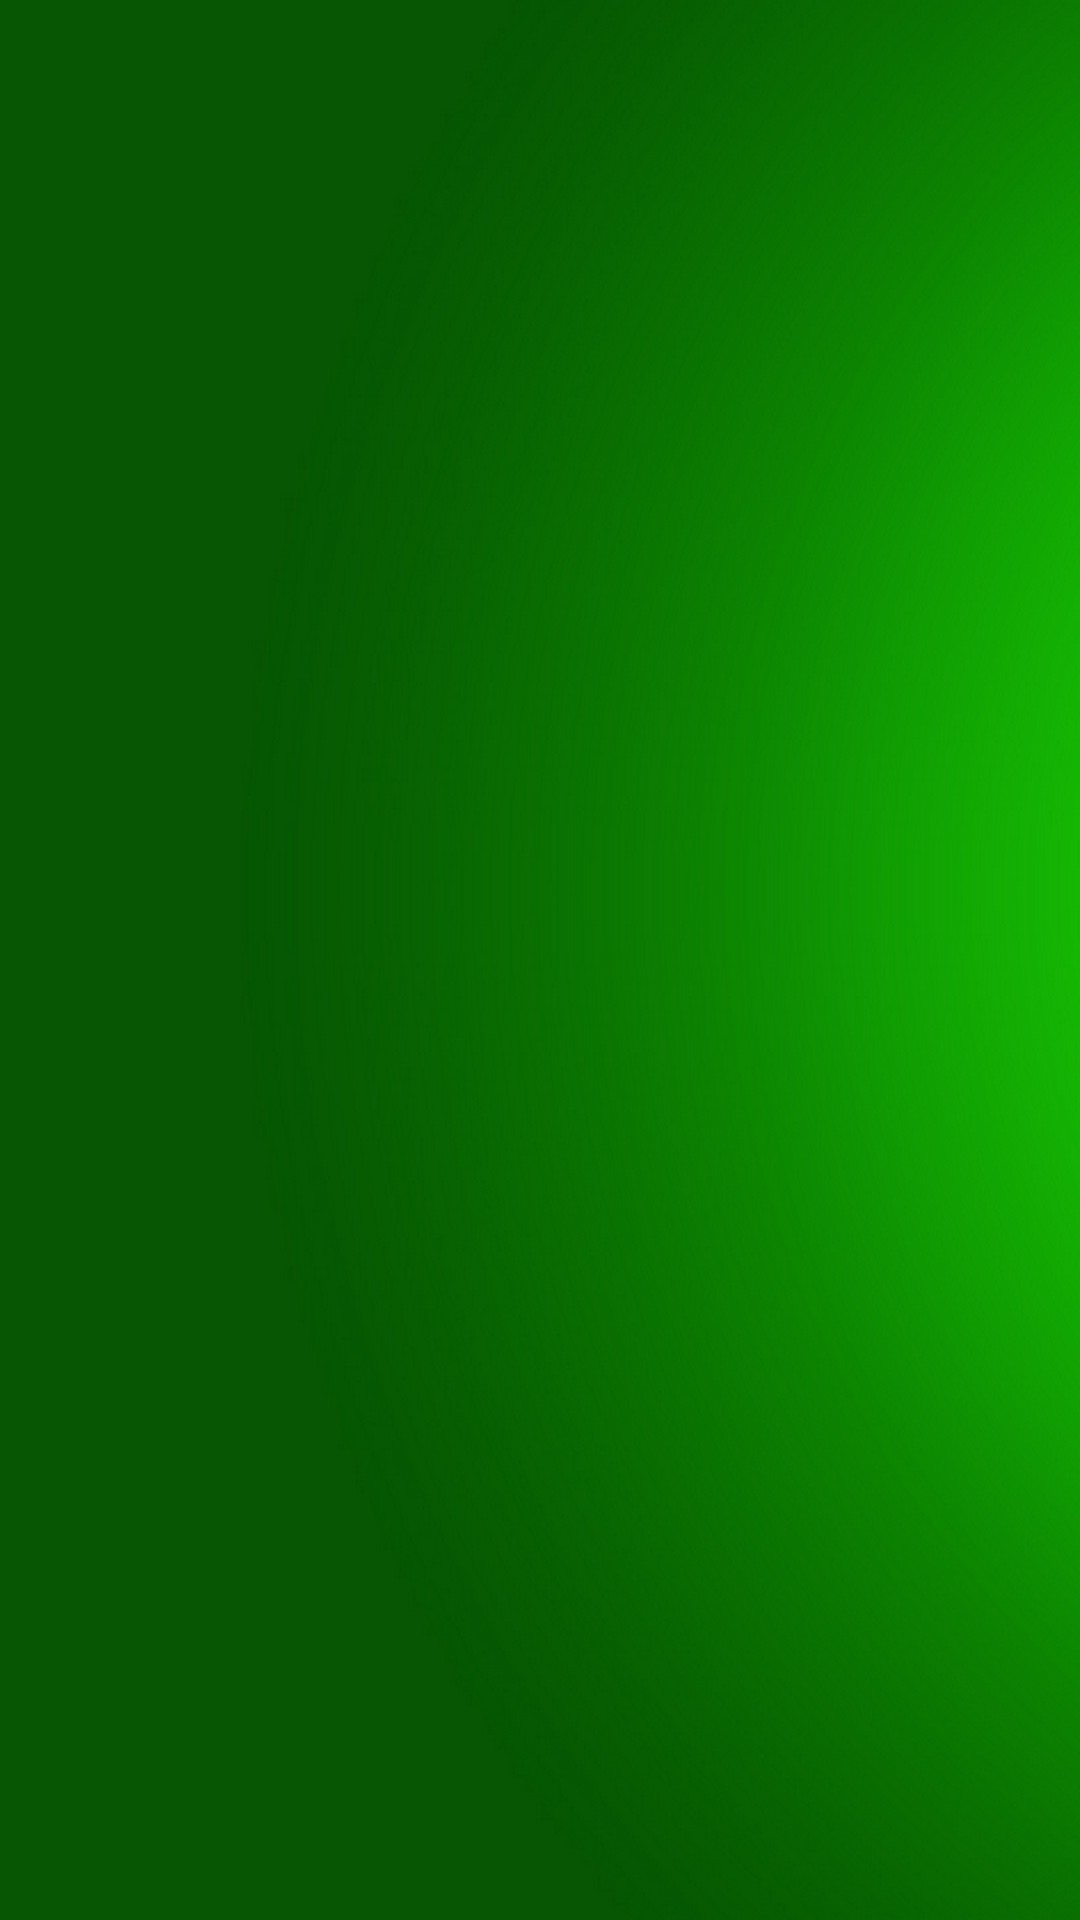 Green iPhone Wallpaper with image resolution 1080x1920 pixel. You can make this wallpaper for your iPhone 5, 6, 7, 8, X backgrounds, Mobile Screensaver, or iPad Lock Screen